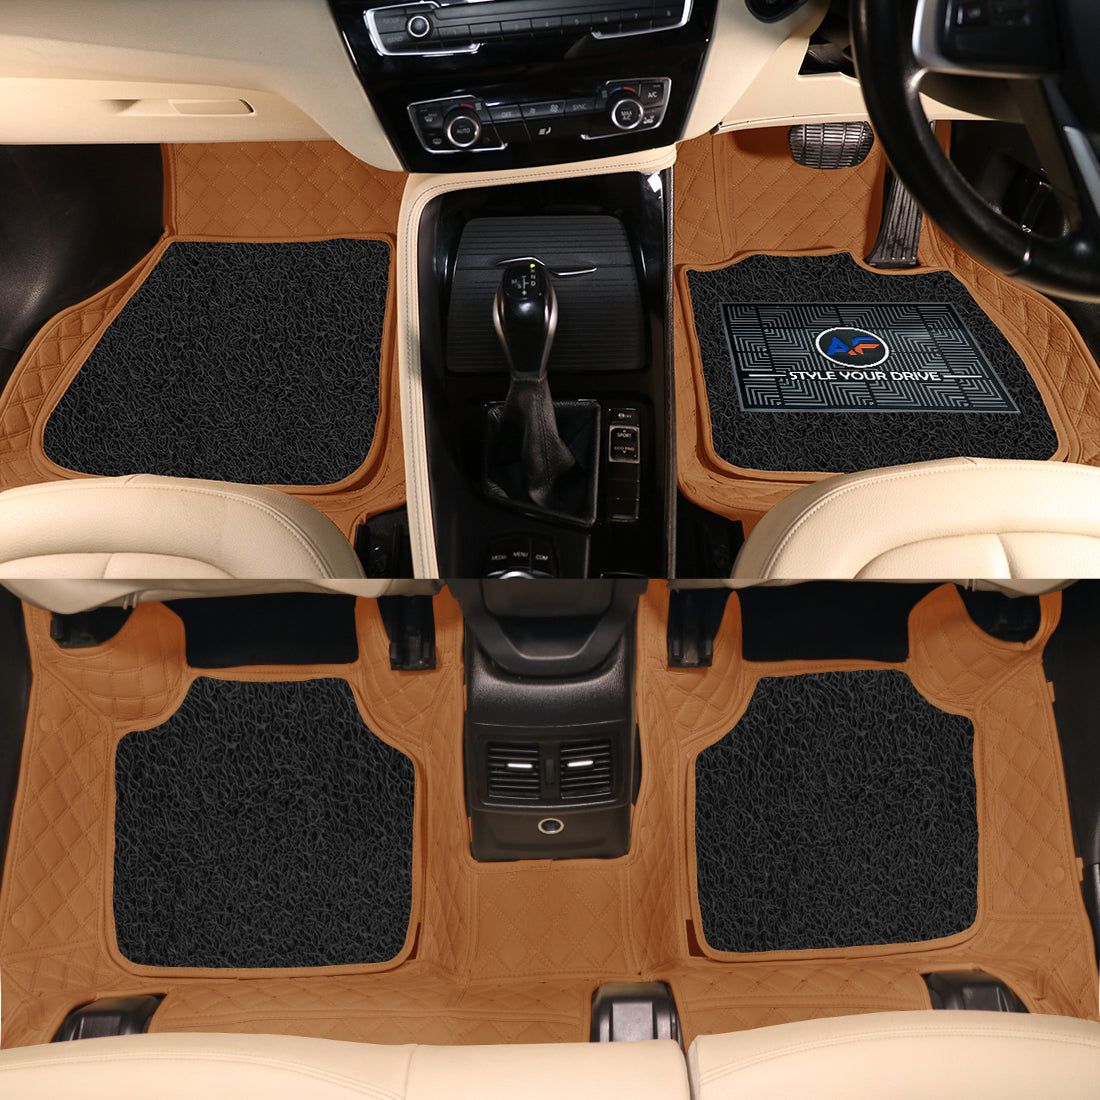 7d-luxury-car-footmats-for-volkswagen-Polo GT-2013-18-custom-designed-pu-leather-with-7-layer-depth-24mm-2-rows